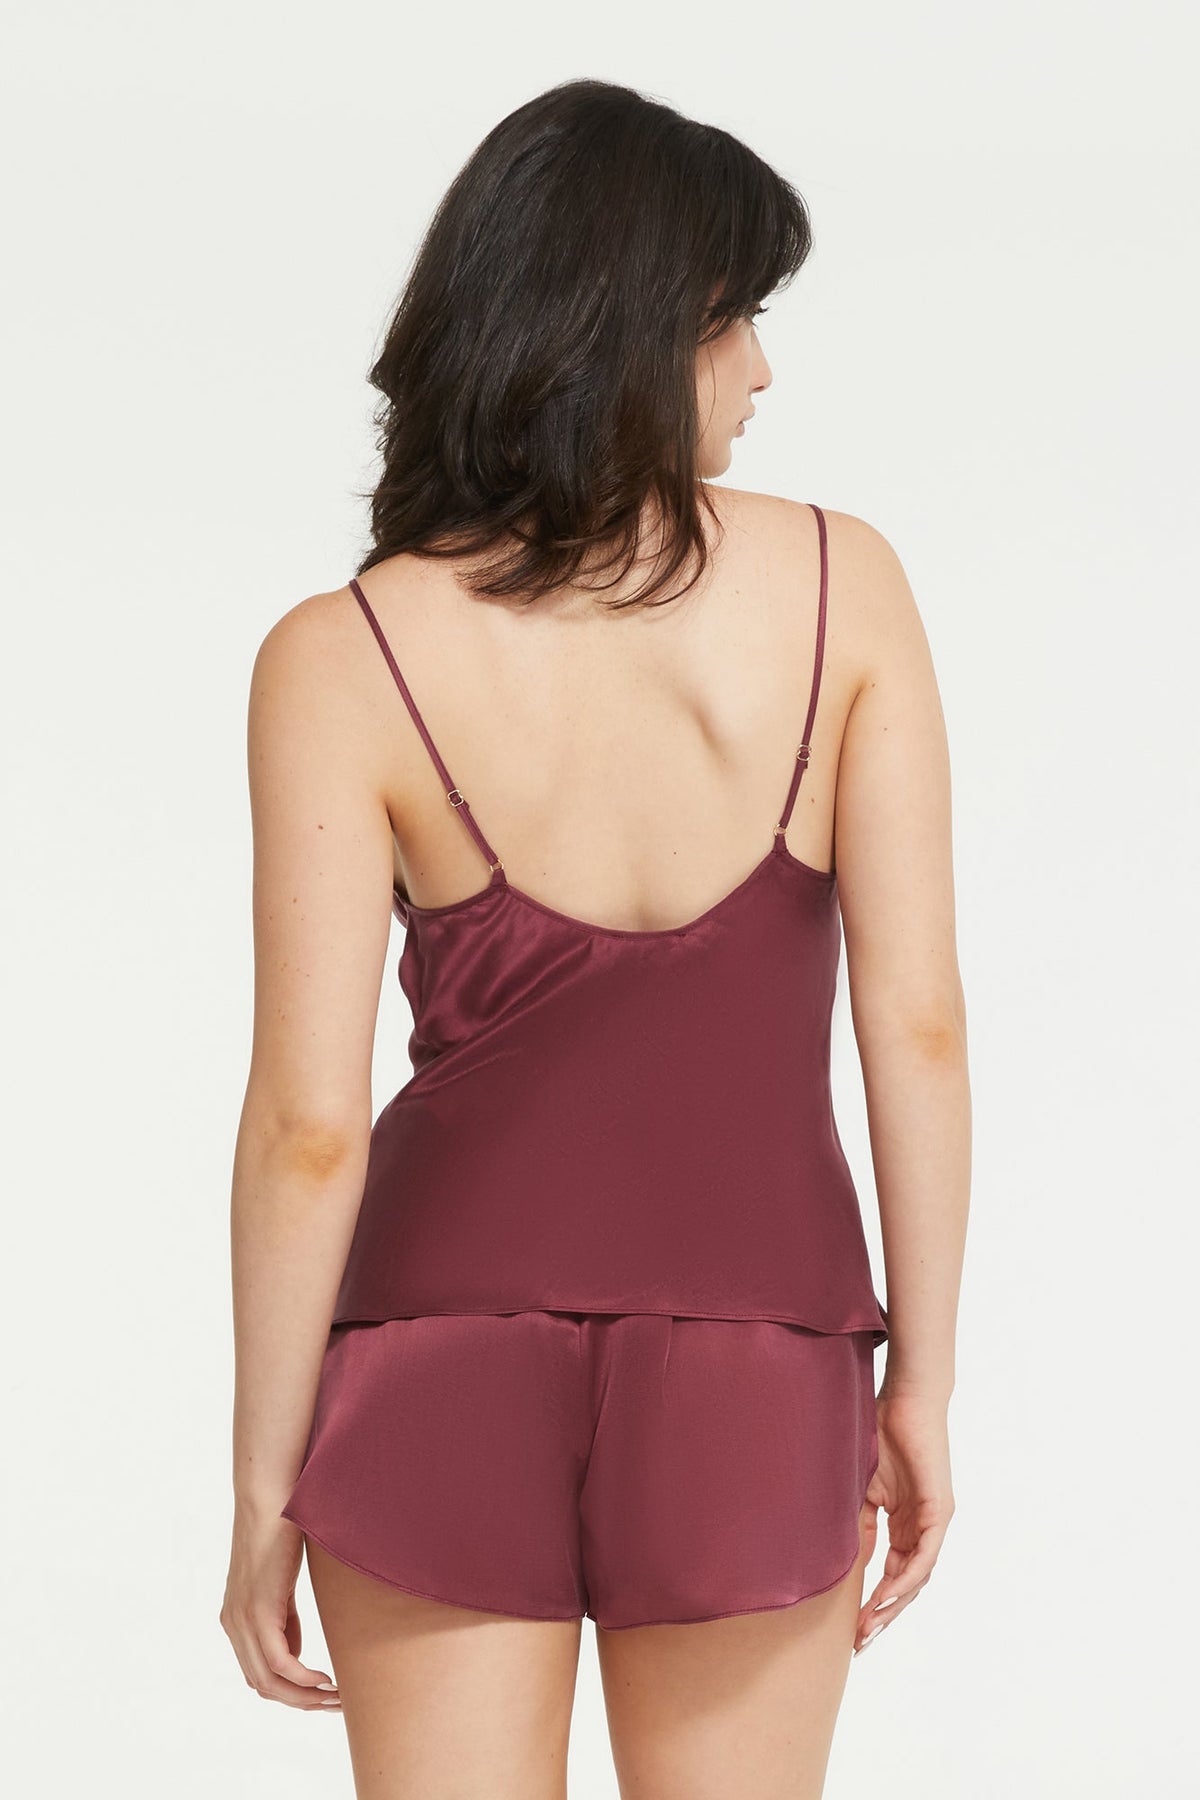 The Antoinette Cami Top in Maroon - 100% Silk by Ginia